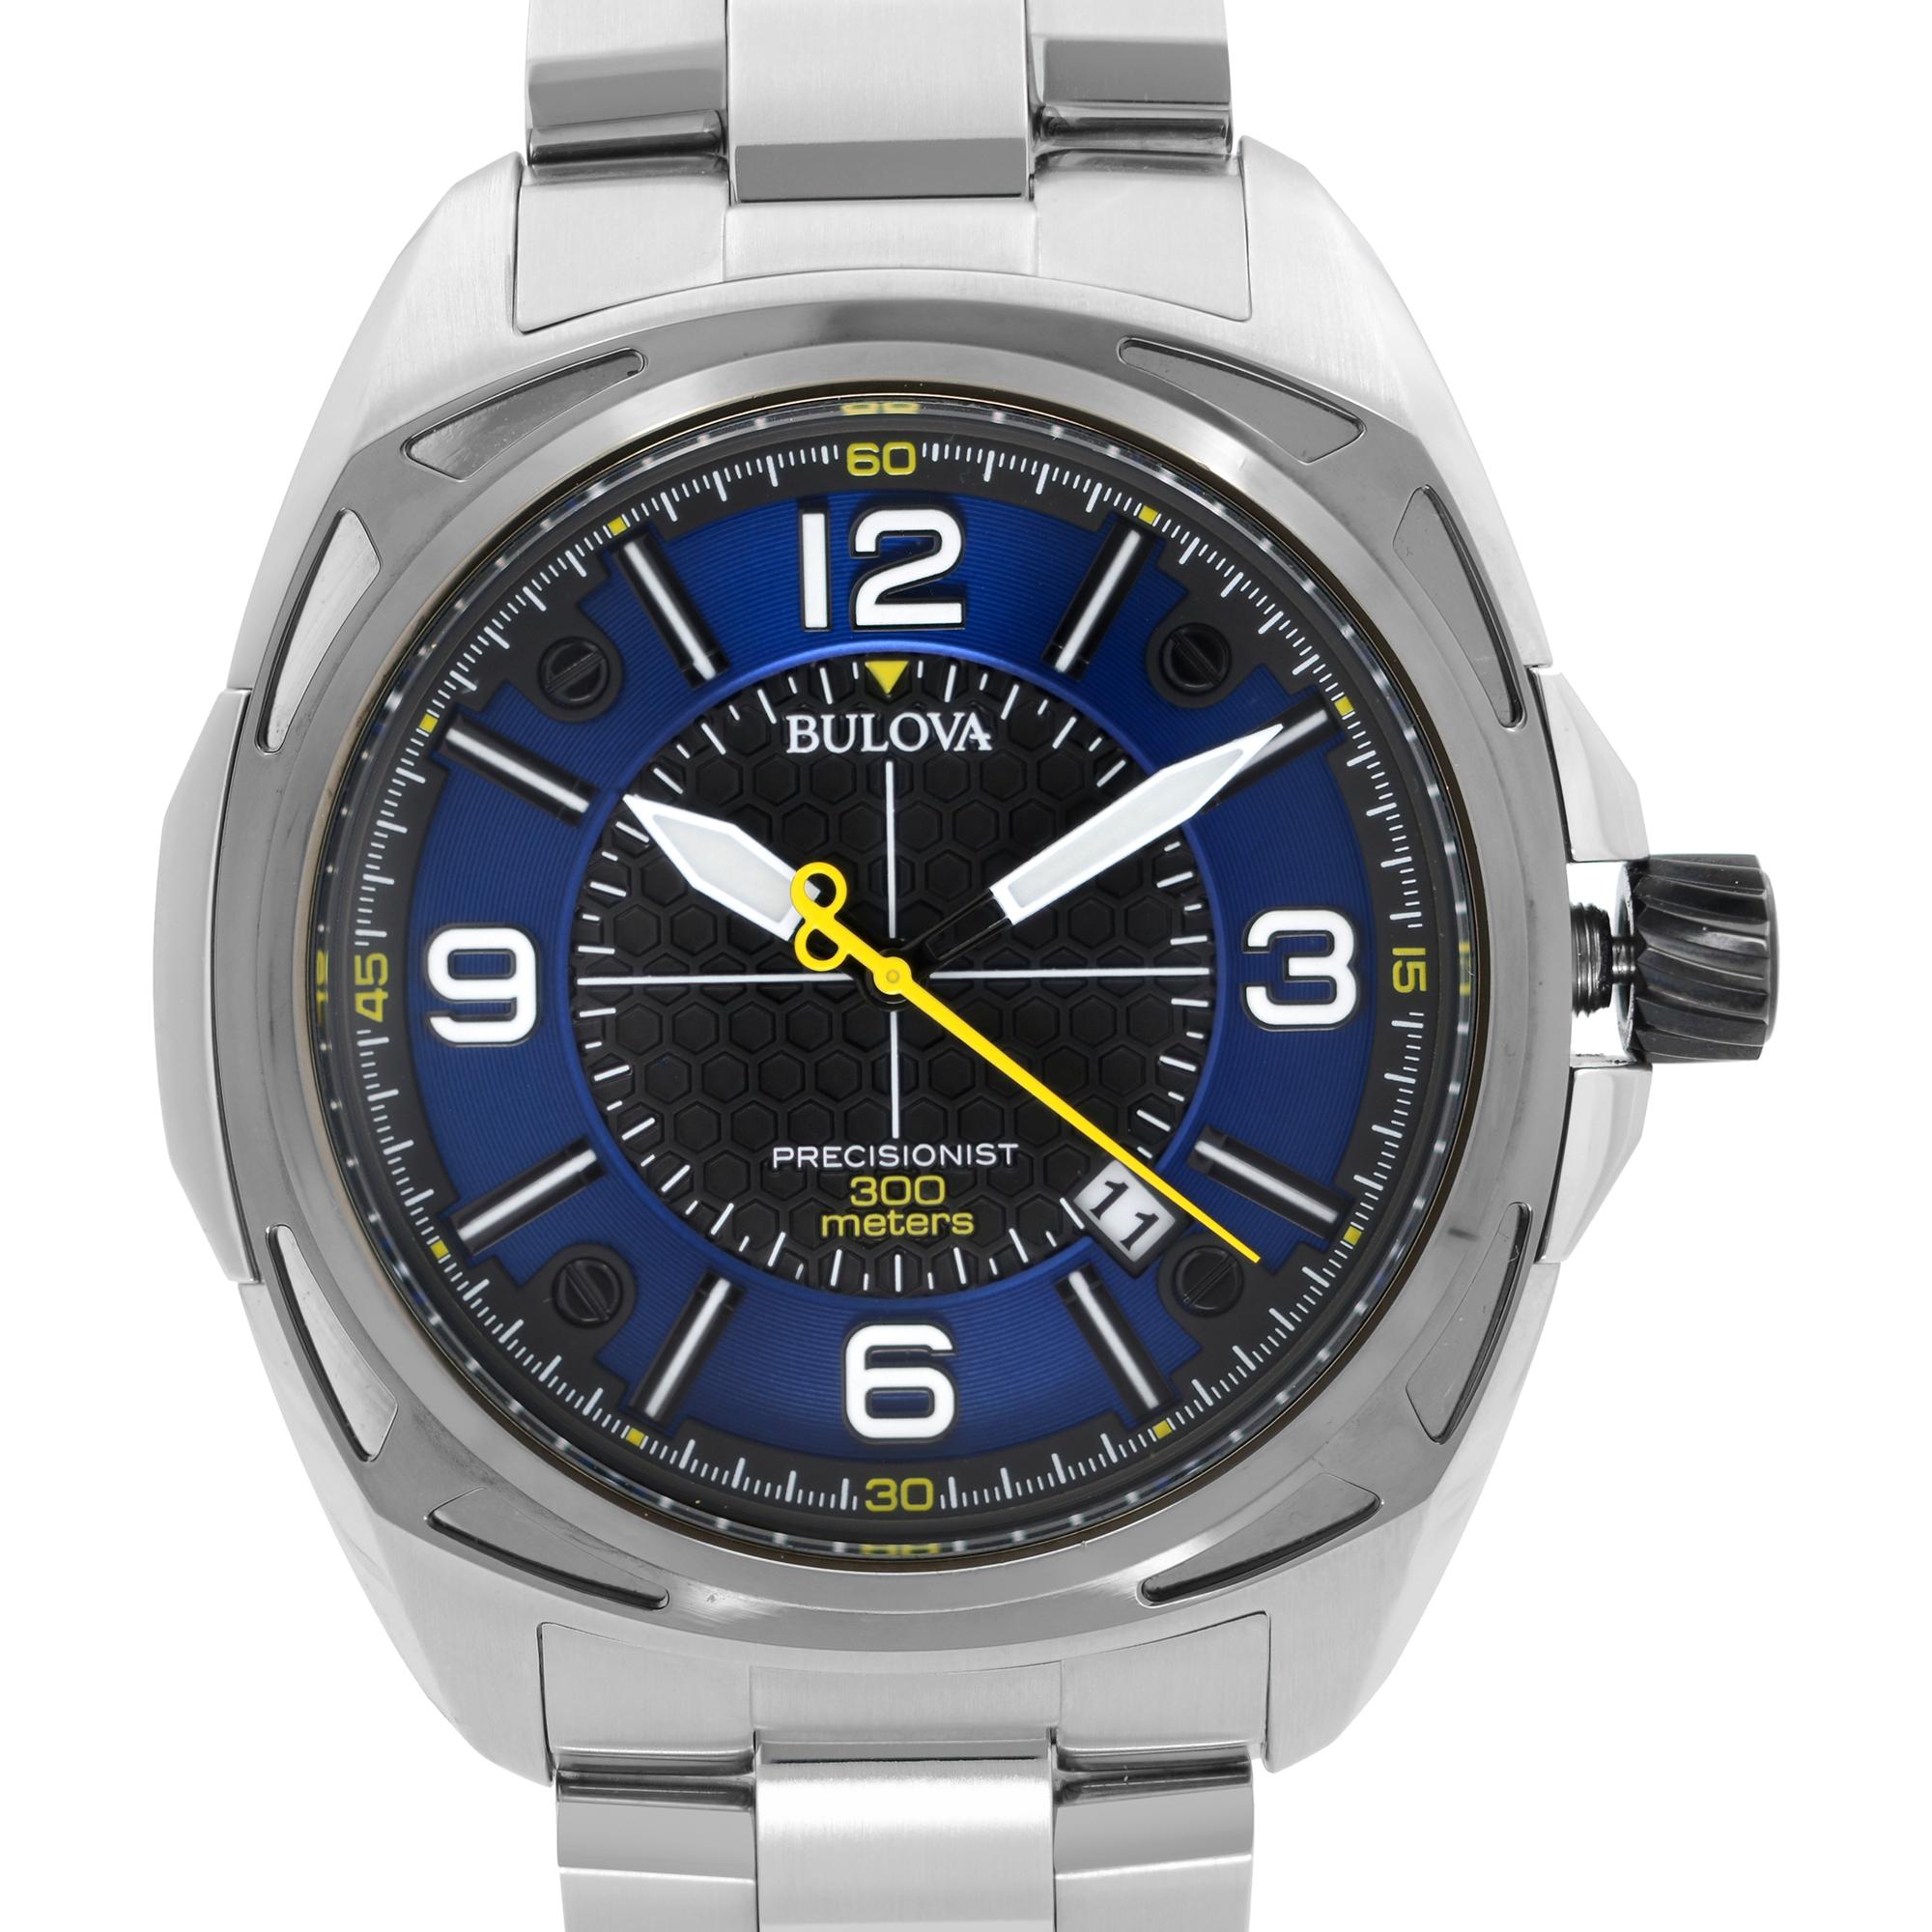 Pre-owned Bulova Precisionist Quartz Men's Watch 98B224. The Watch Has a Couple of Dents on the Bezel. This Beautiful Timepiece Features: Stainless Steel Case and Bracelet, Fixed Black Ion-Plated Bezel, Blue & Black Dial with Luminous White & Black